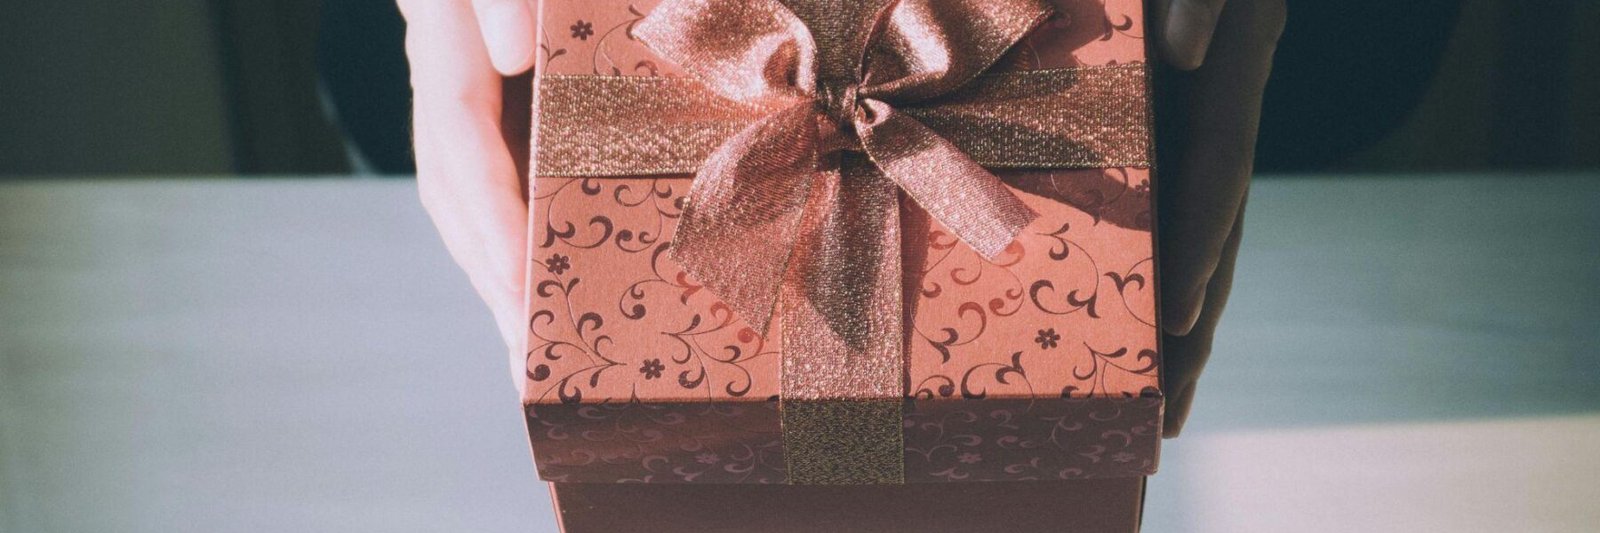 How to Choose the Right Corporate Gifting Company